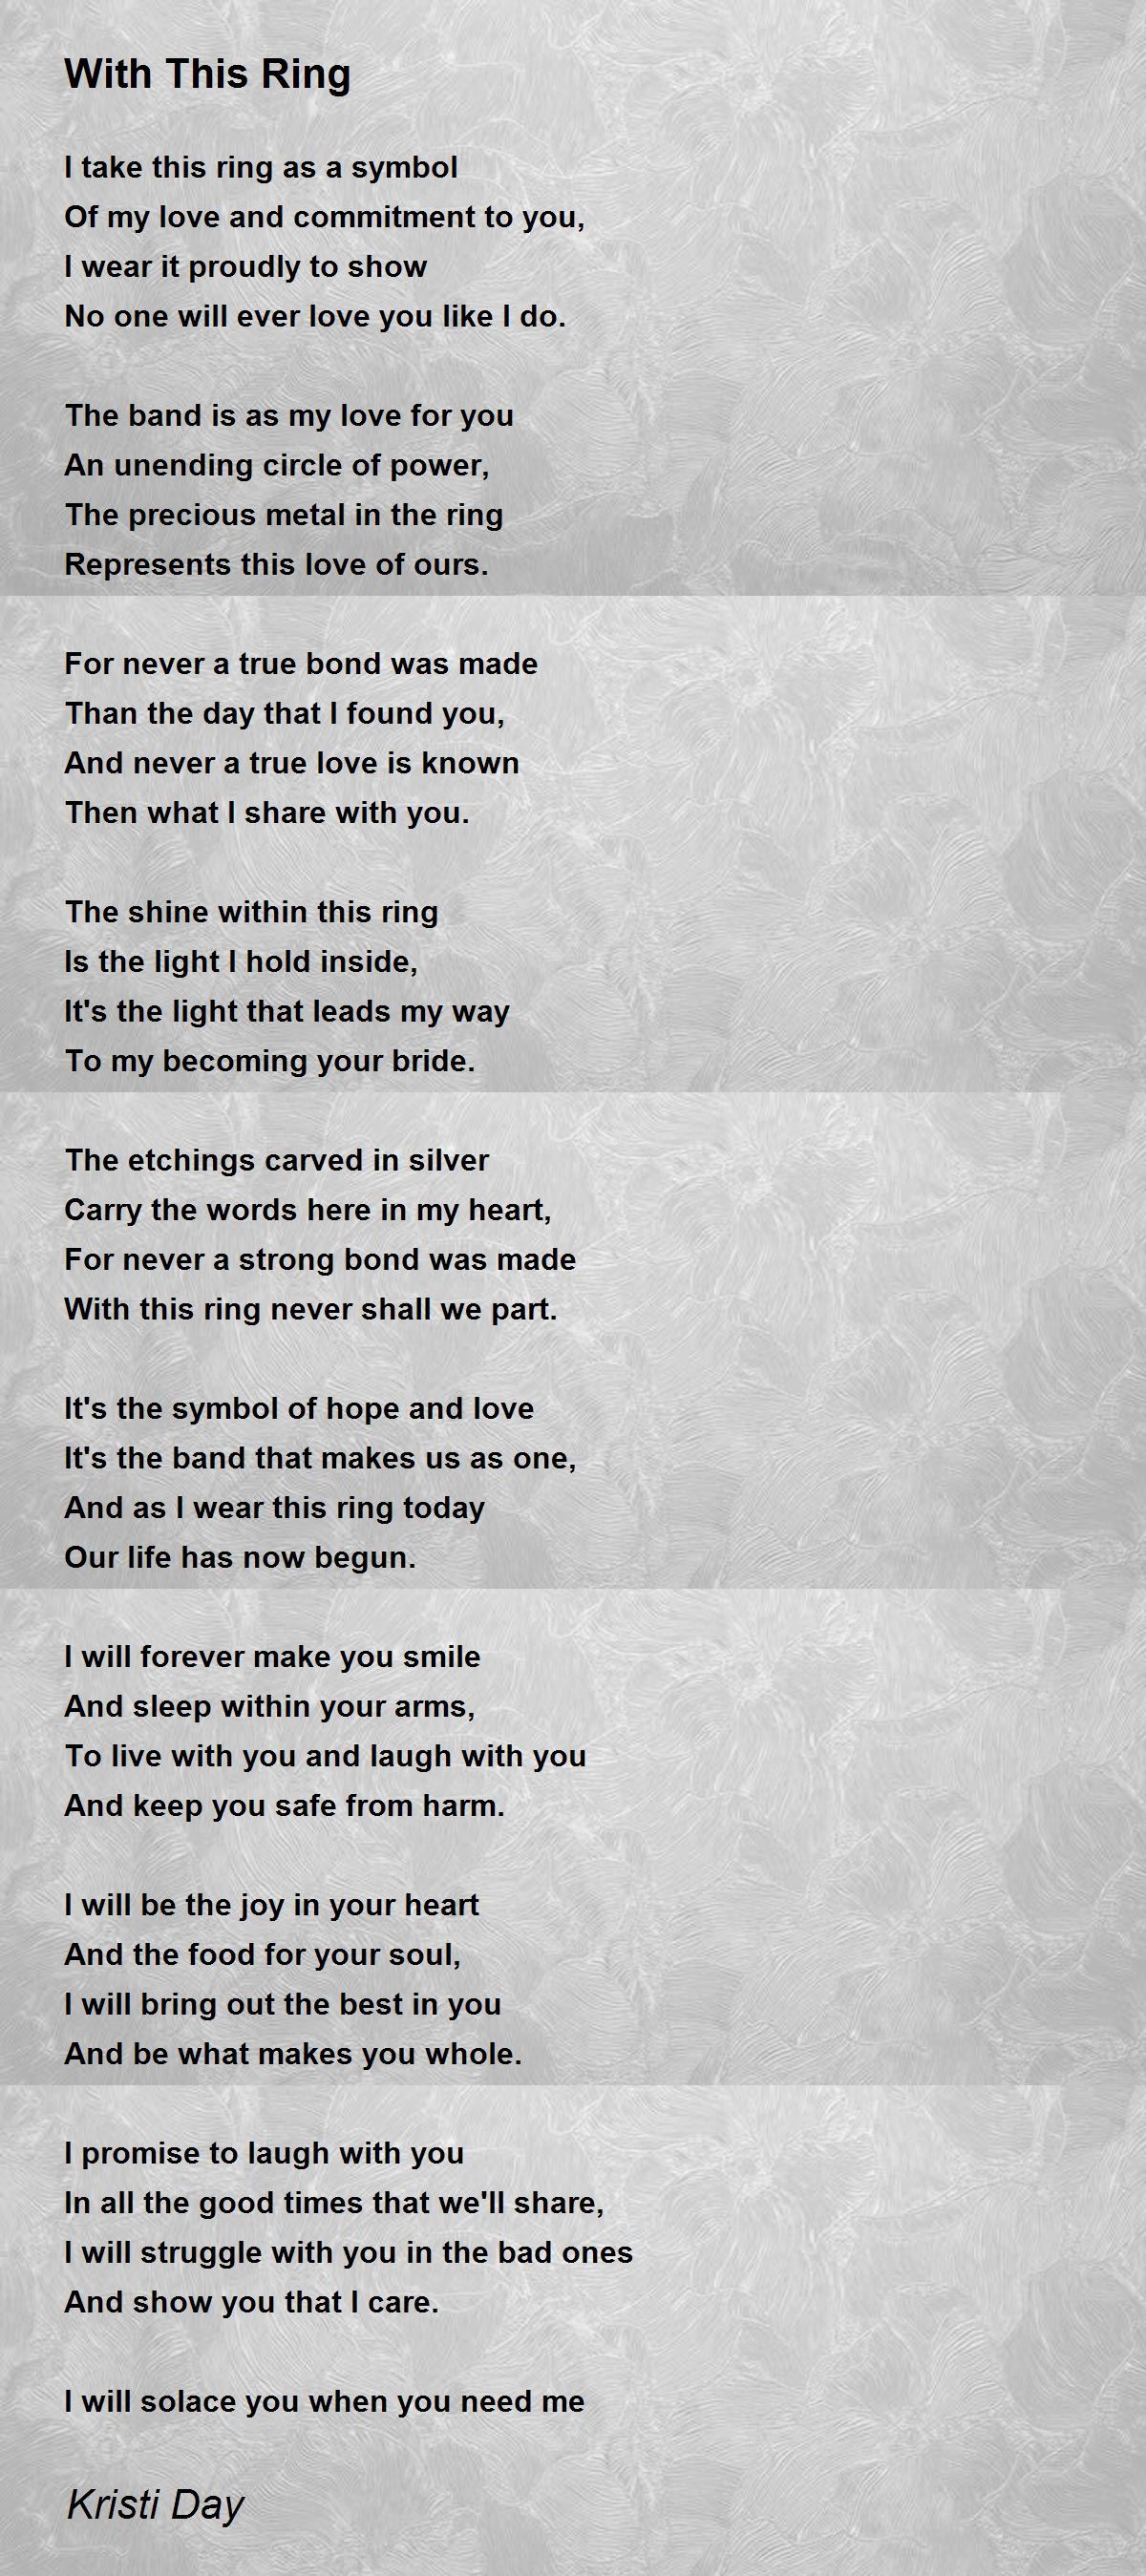 Bewijs Mitt James Dyson With This Ring - With This Ring Poem by Kristi Day